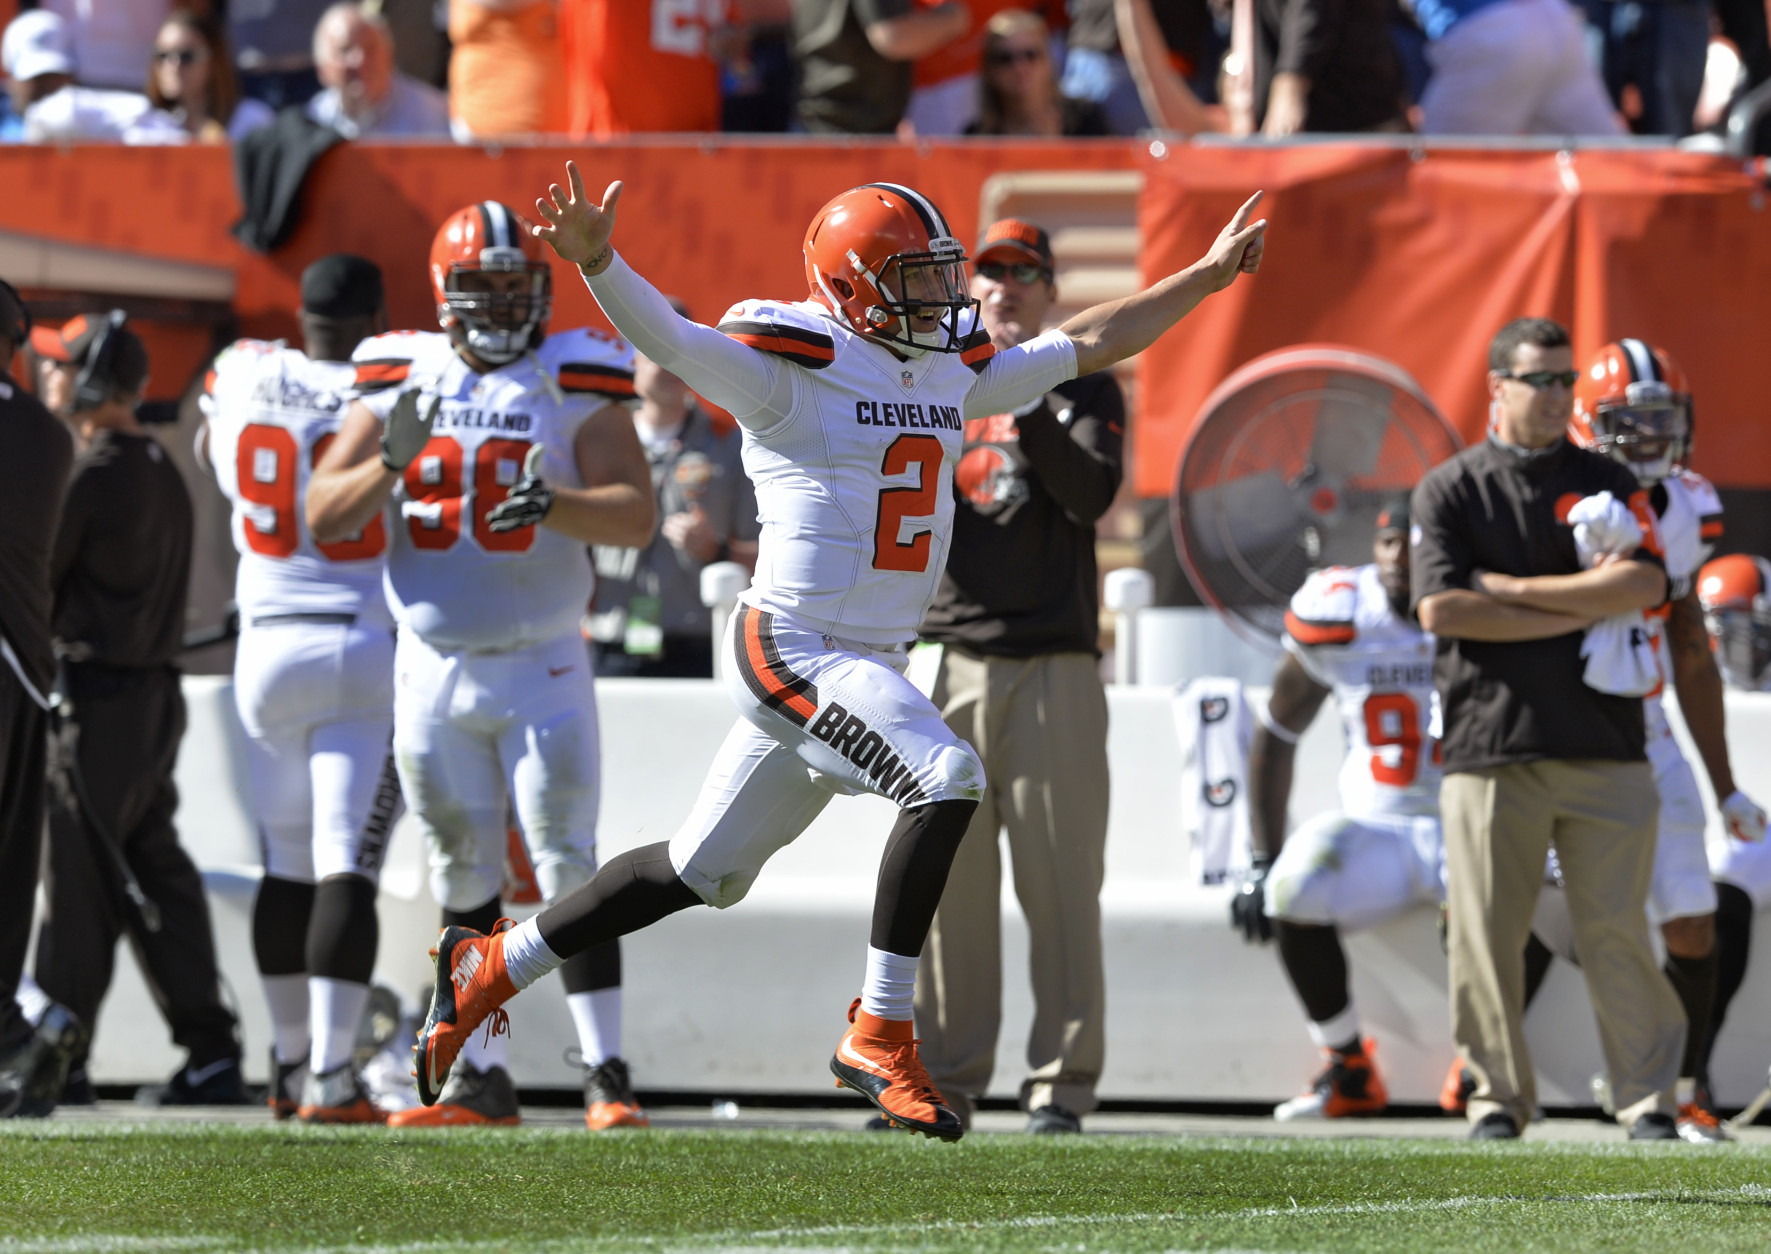 Cleveland Browns quarterback Johnny Manziel (2) celebrates after throwing a 50-yard touchdown pass to Travis Benjamin in the second half of an NFL football game against the Tennessee Titans, Sunday, Sept. 20, 2015, in Cleveland. (AP Photo/Ron Schwane)